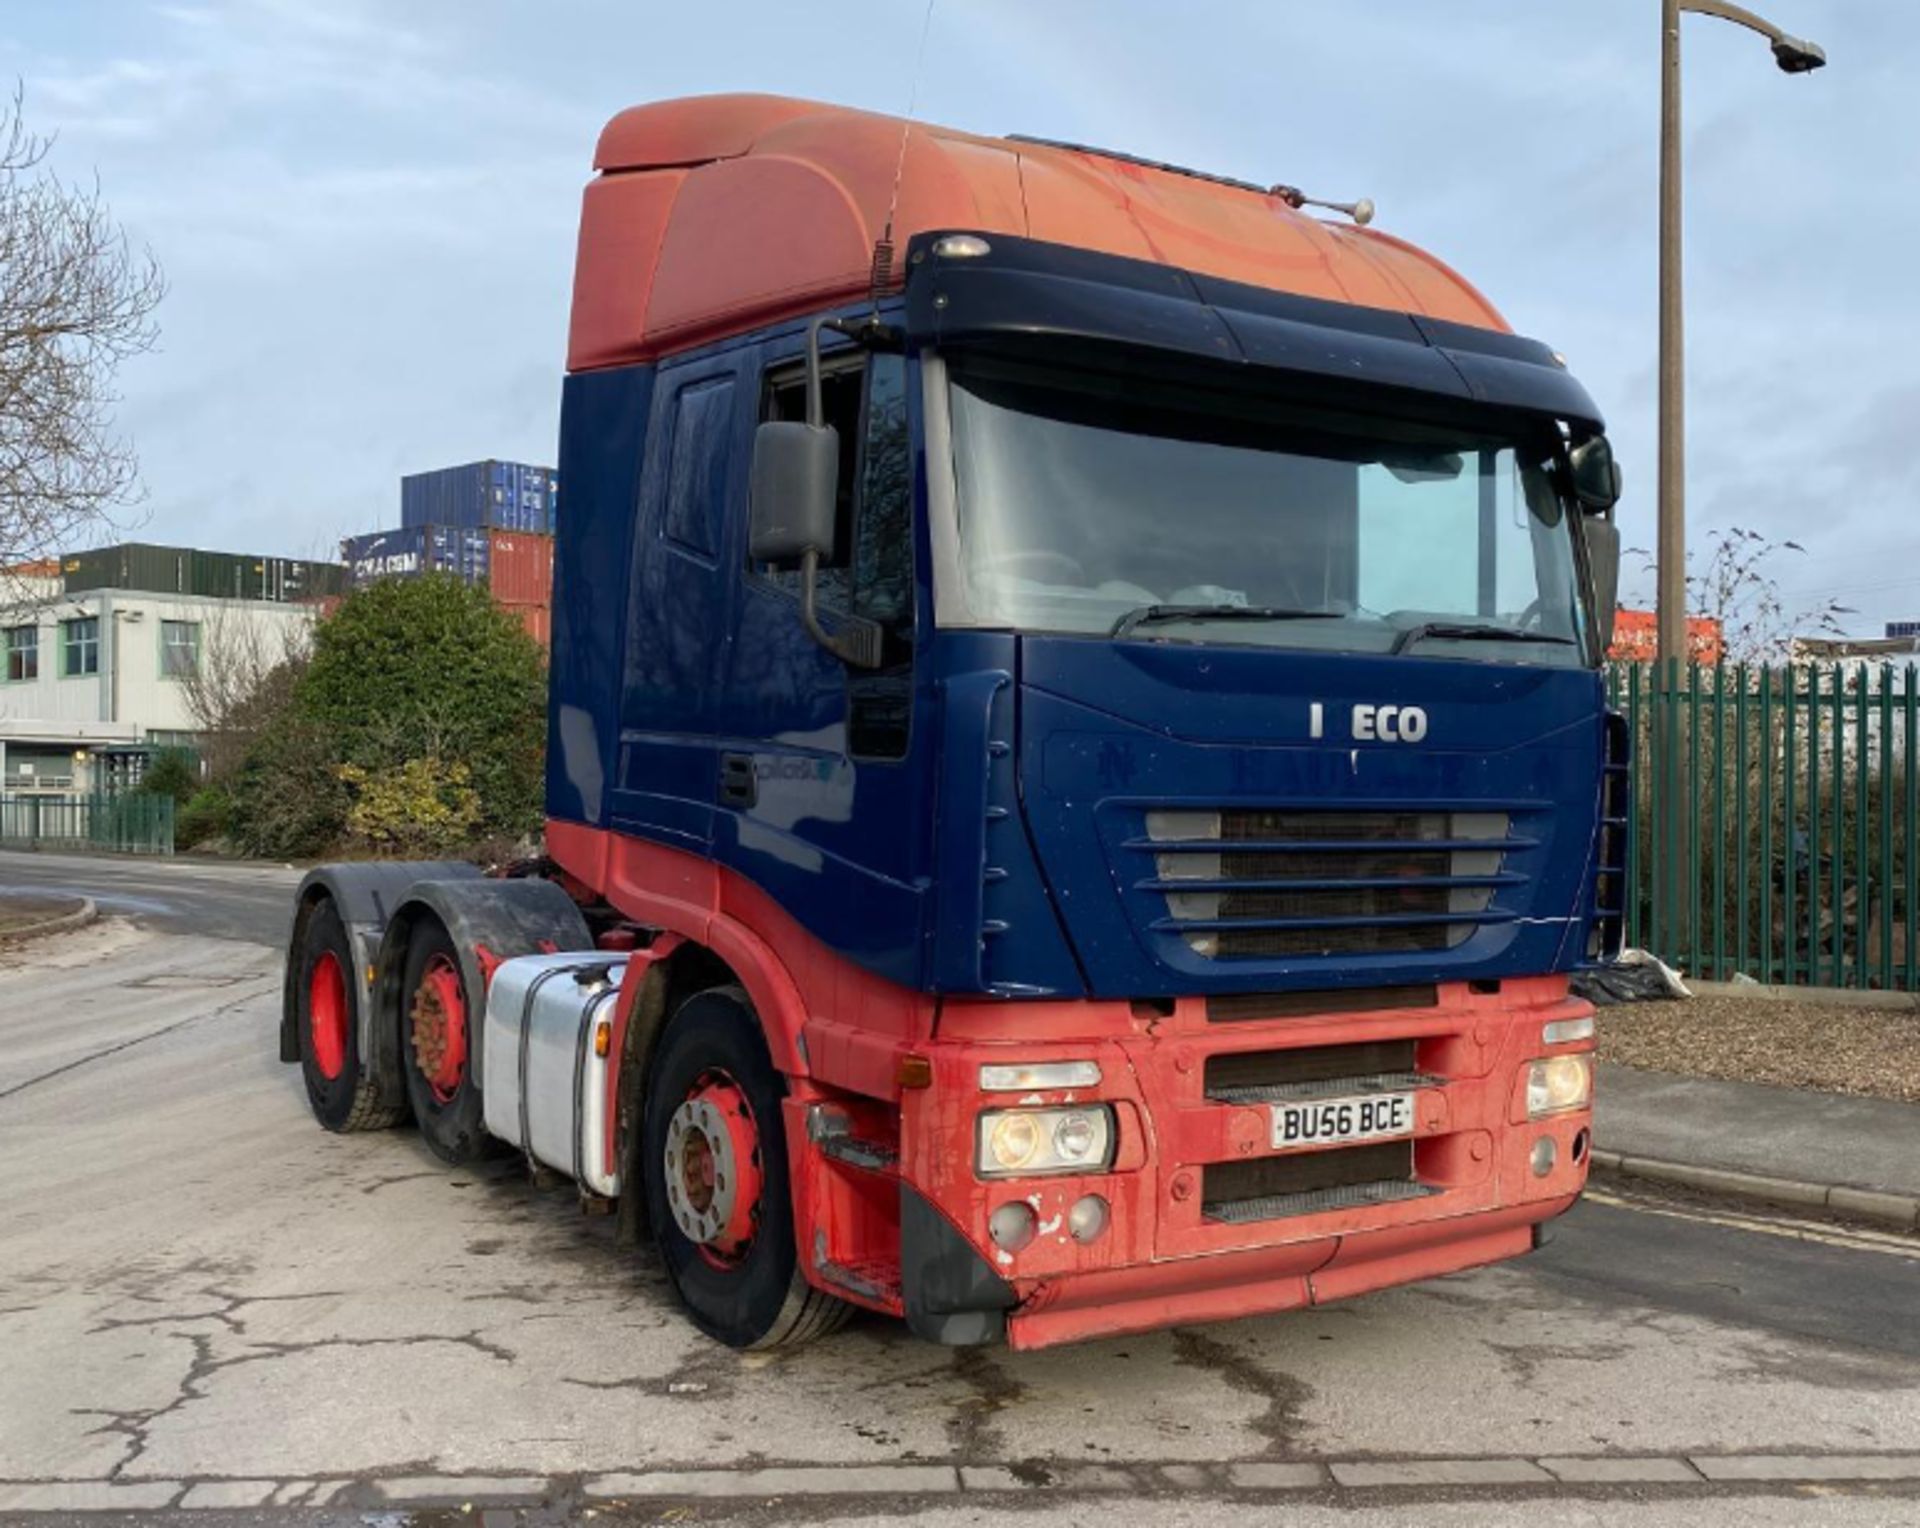 EXPLORATION READY: '06 IVECO STRALIS 6X2 DIESEL - Image 3 of 11